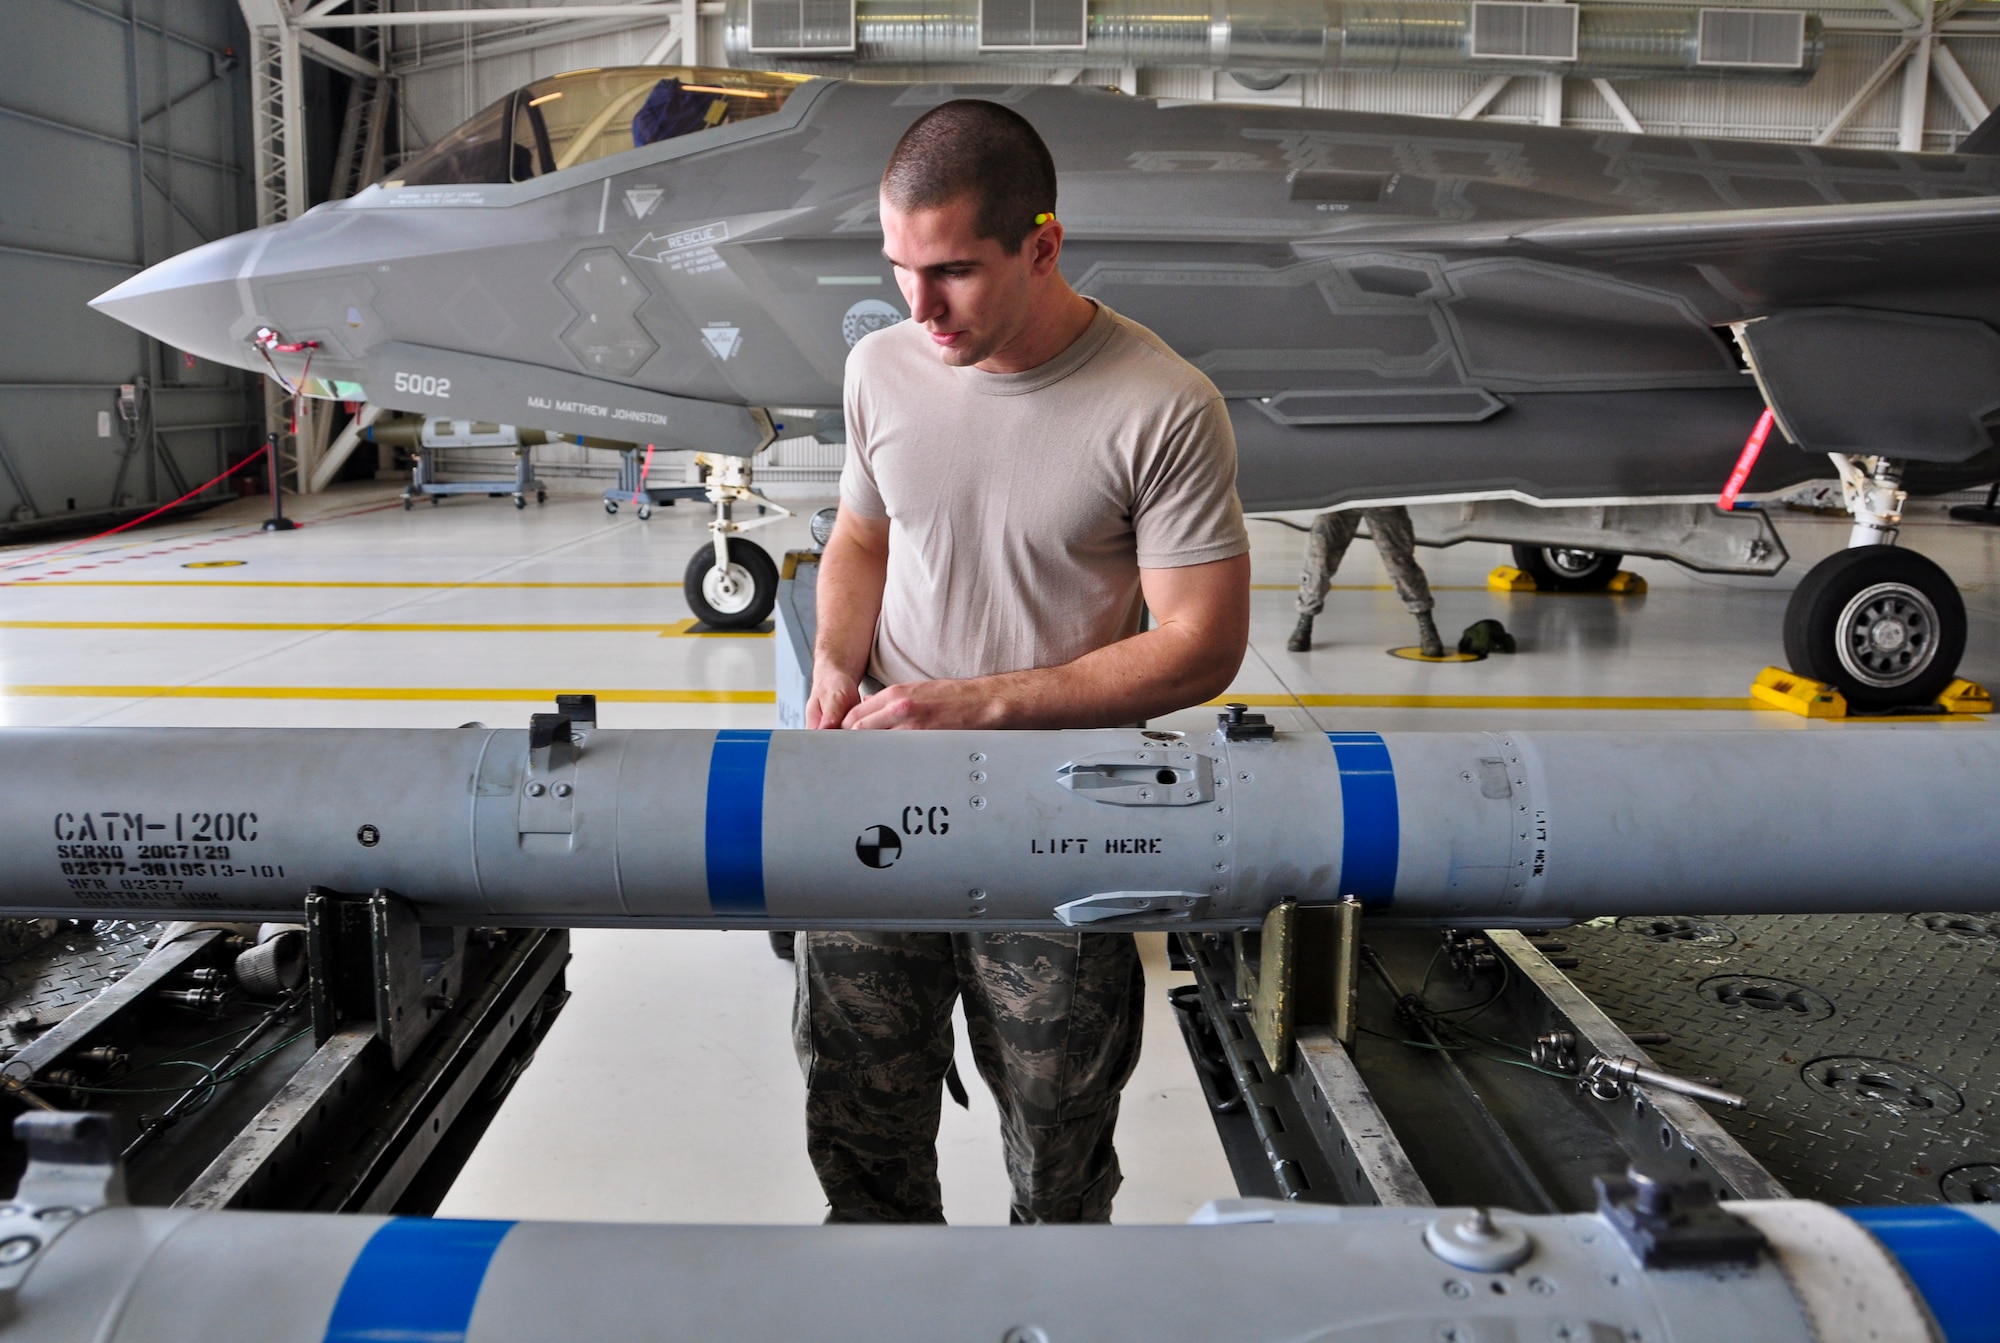 Airman 1st Class Reece Zoller makes an AIM-120 advanced medium-range air-to-air missile safe before loading it onto an F-35A Lightning II during a qualification load Oct. 10, 2014, at Eglin Air Force Base, Fla. The F-35 training program at Eglin AFB currently serves as the primary source of F-35 expertise to new F-35A units across the Air Force. Zoller is a load crewmember from the 58th Aircraft Maintenance Unit crew one. (U.S. Air Force photo/Staff Sgt. Marleah Robertson)